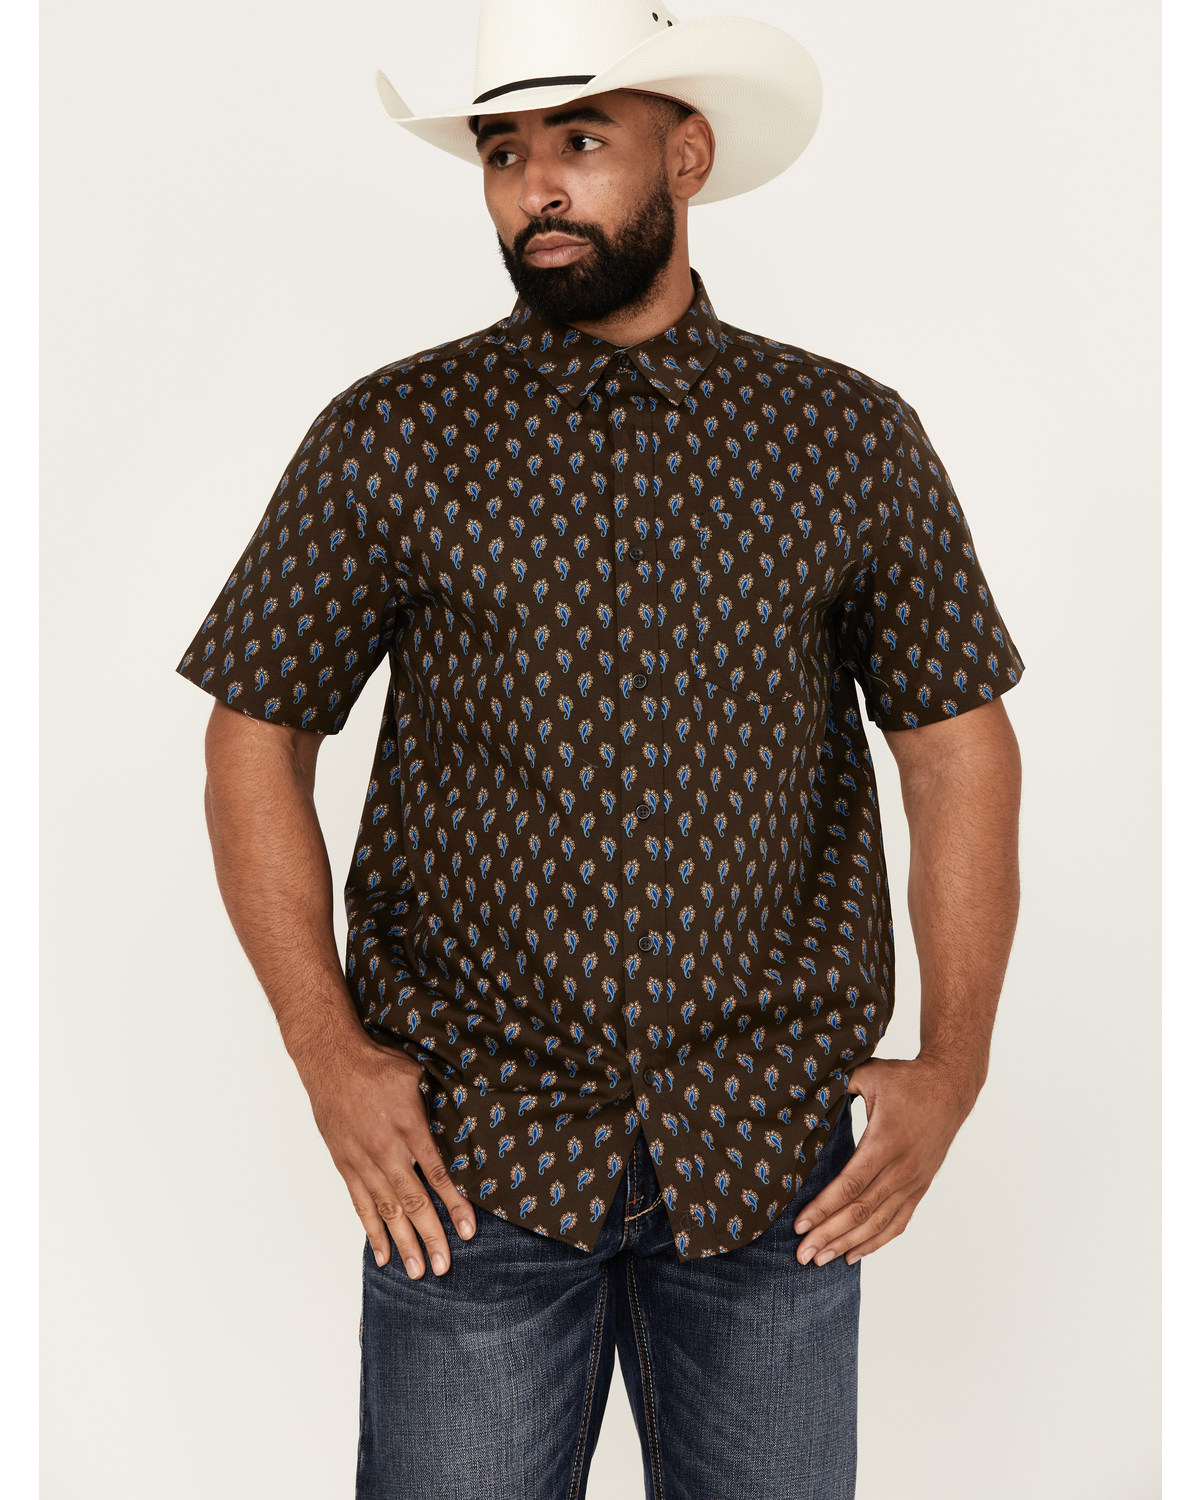 Cody James Men's Lampshade Paisley Print Short Sleeve Button-Down Stretch Western Shirt